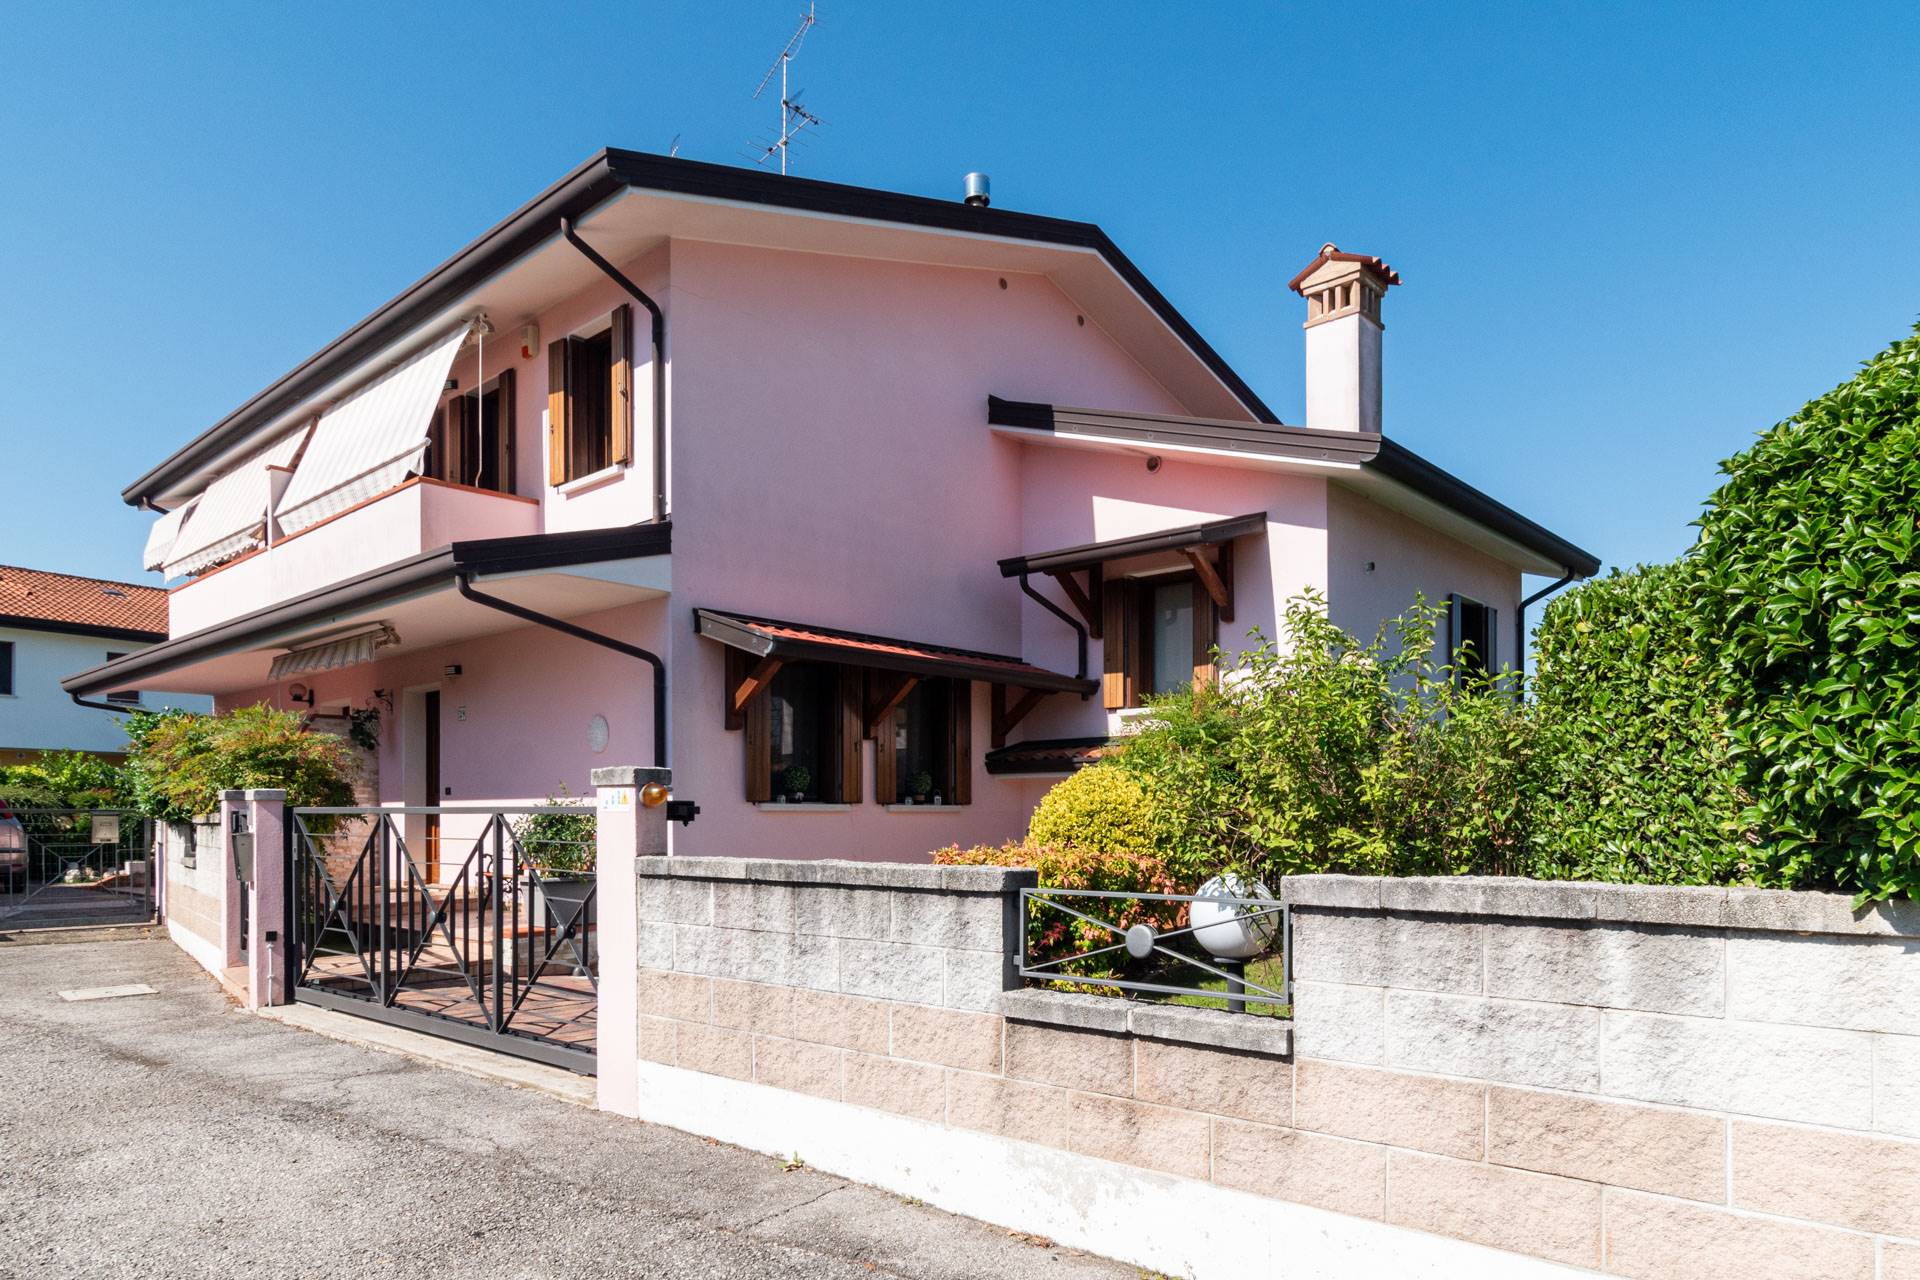 PORTOGRUARO, Duplex villa for sale of 135 Sq. mt., Excellent Condition, Heating Individual heating system, Energetic class: E, placed at Raised, composed by: 7 Rooms, Show cooking, , 3 Bedrooms, 2 